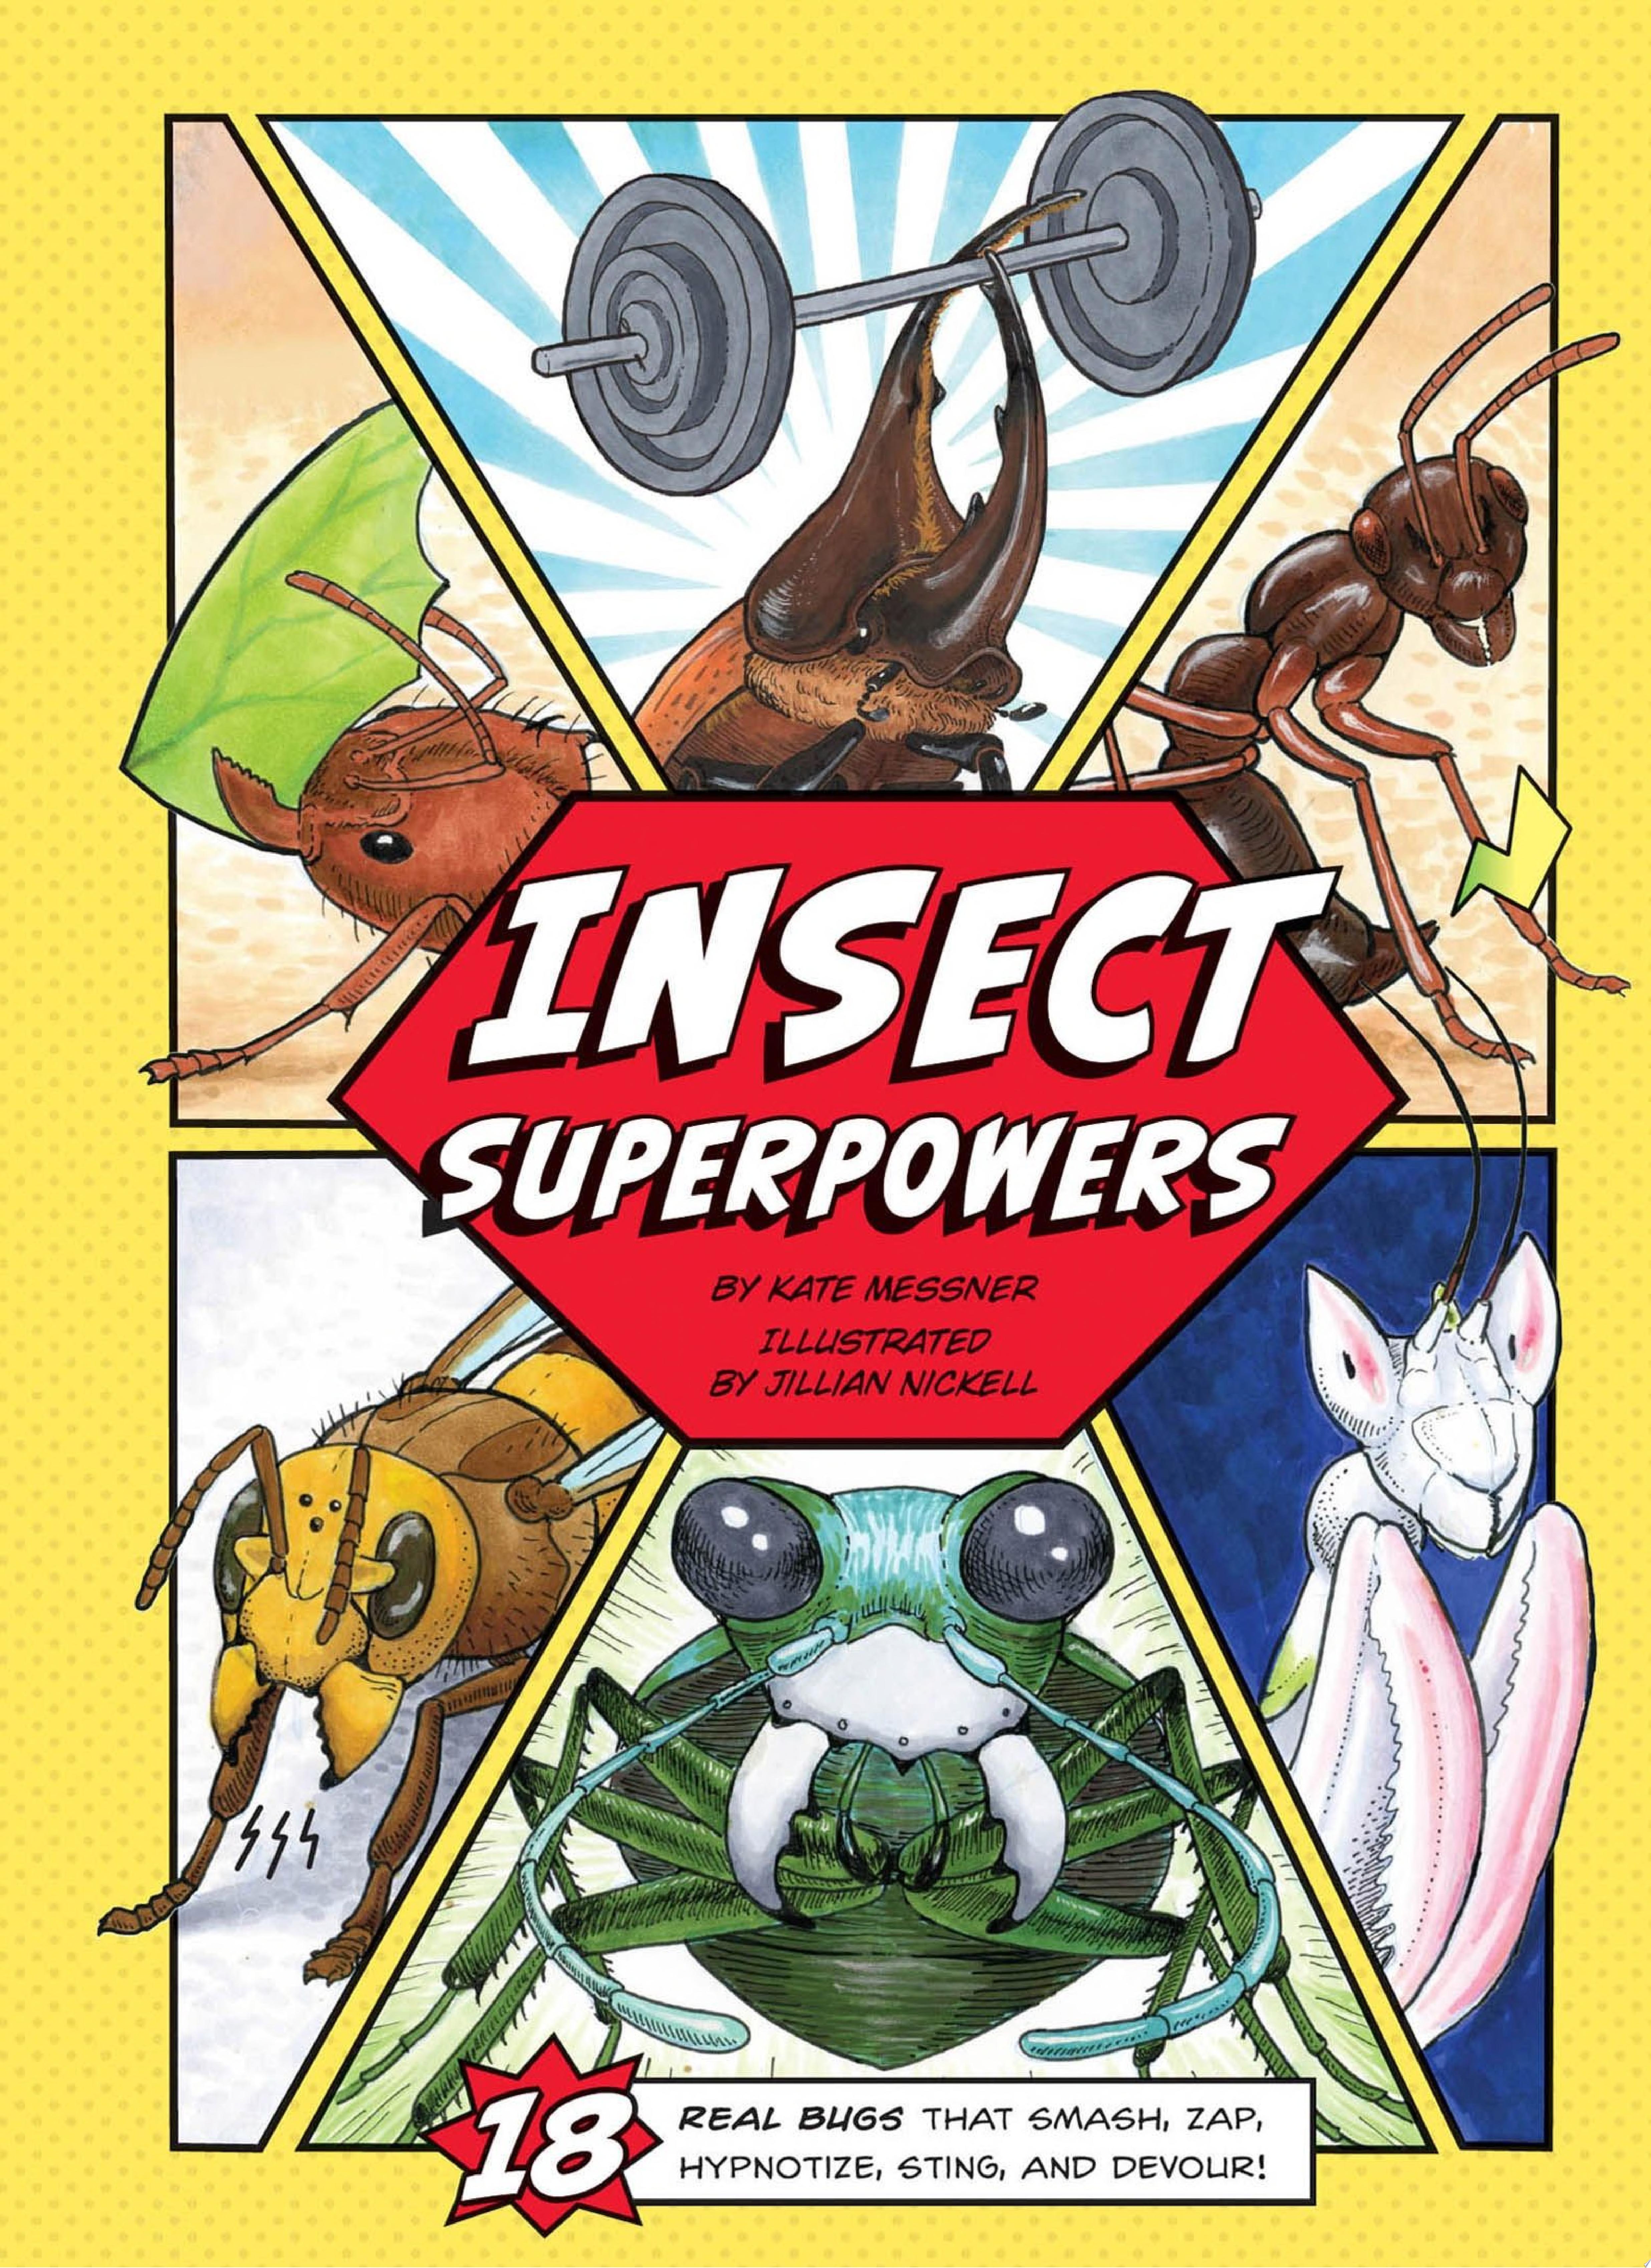 Image for "Insect Superpowers"